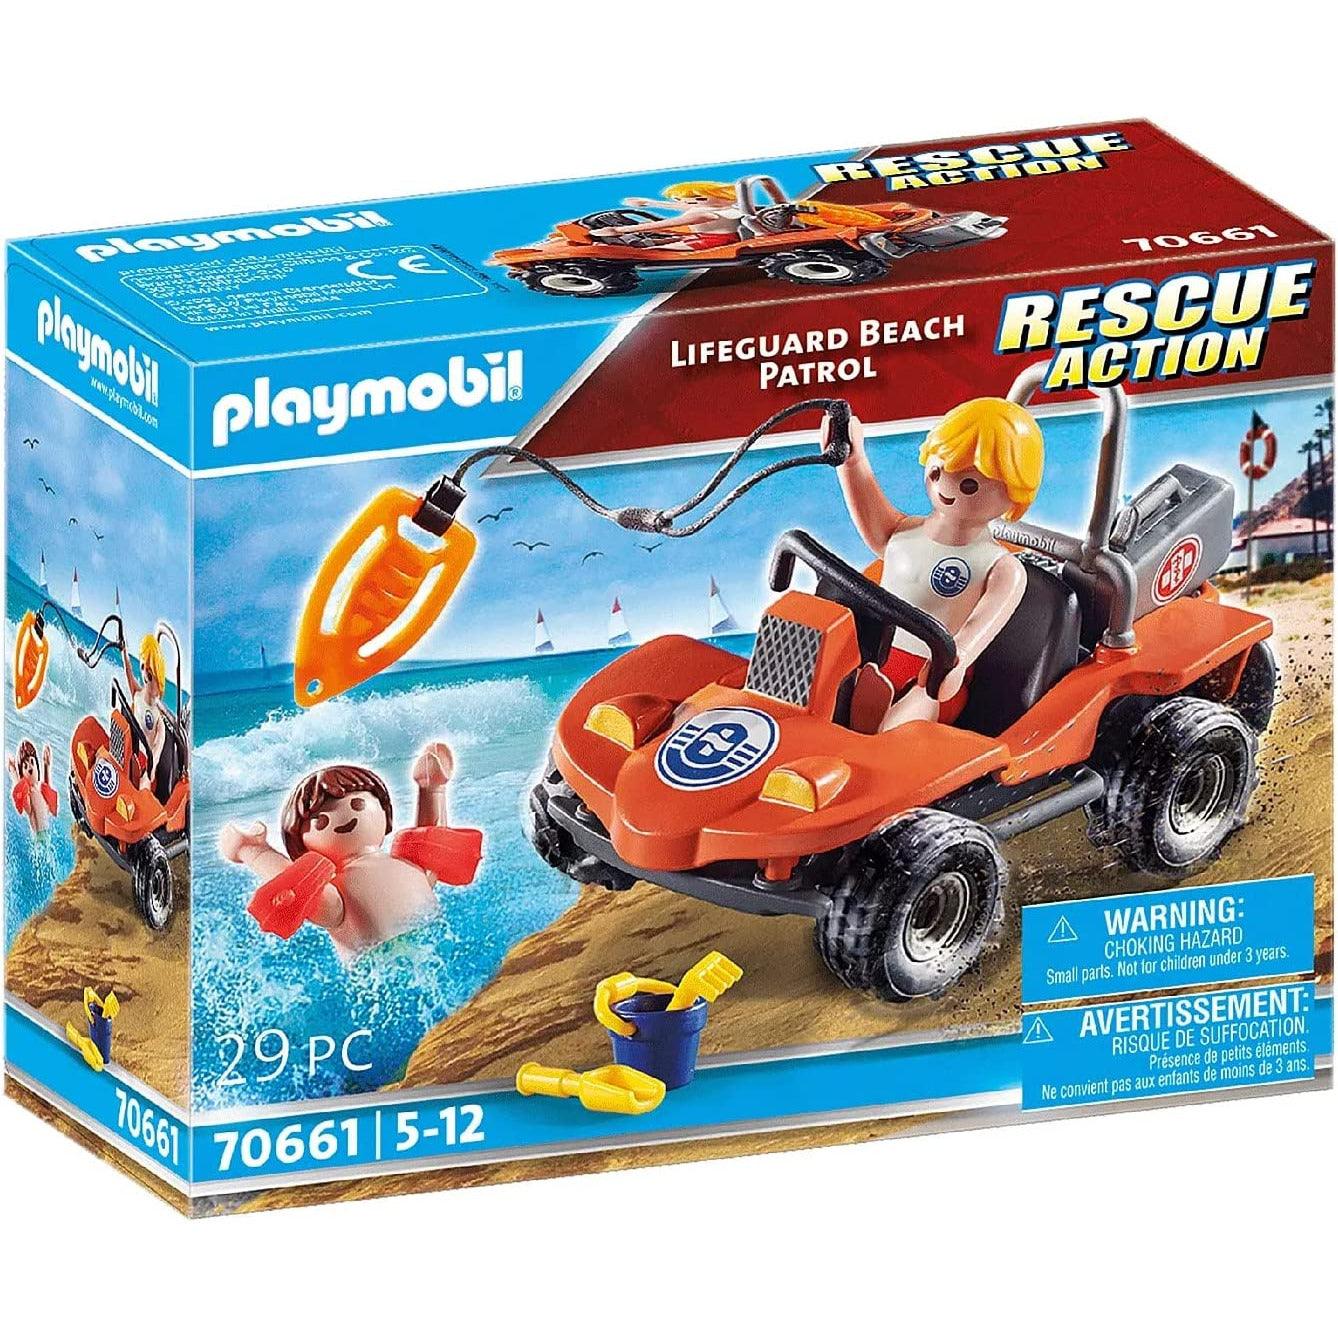 PLAYMOBIL  70661 Lifeguard Beach Patrol rescue action 29 Pcs - BumbleToys - 5-7 Years, Boys, Friends, LEGO, OXE, playmobil, Pre-Order, rescue action